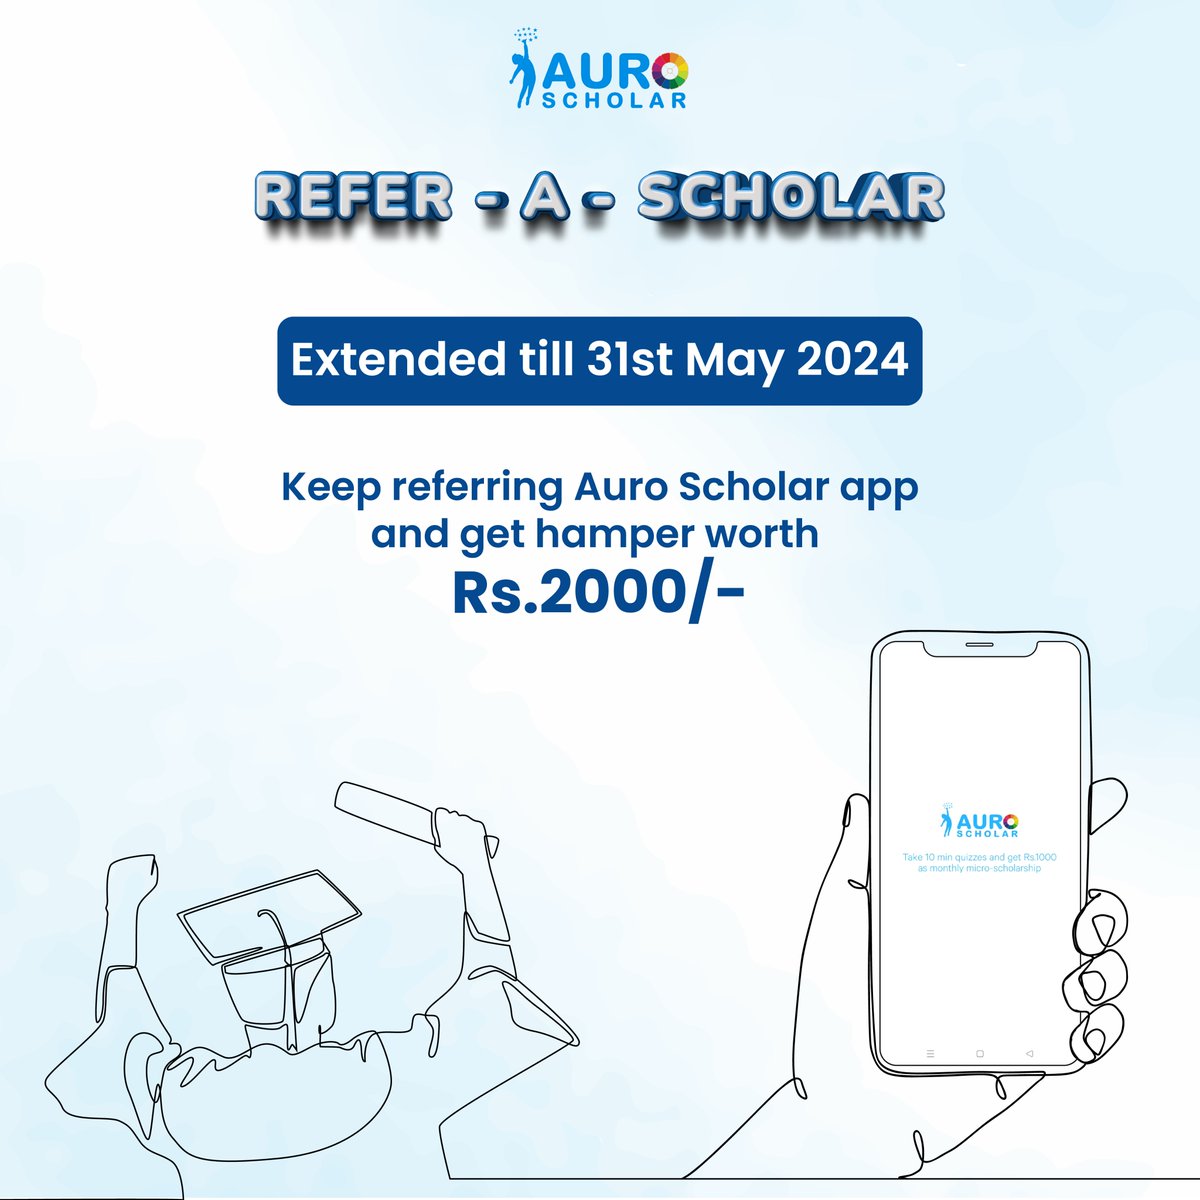 REFER- A - SCHOLAR extended till 31st May 2024

Keep referring Auro Scholar to your friends and get exciting rewards worth Rs.2000/-

Minimum referrals = 50   
Refer now : bit.ly/3viXZHO 

#auroscholar #referascholar #refernow